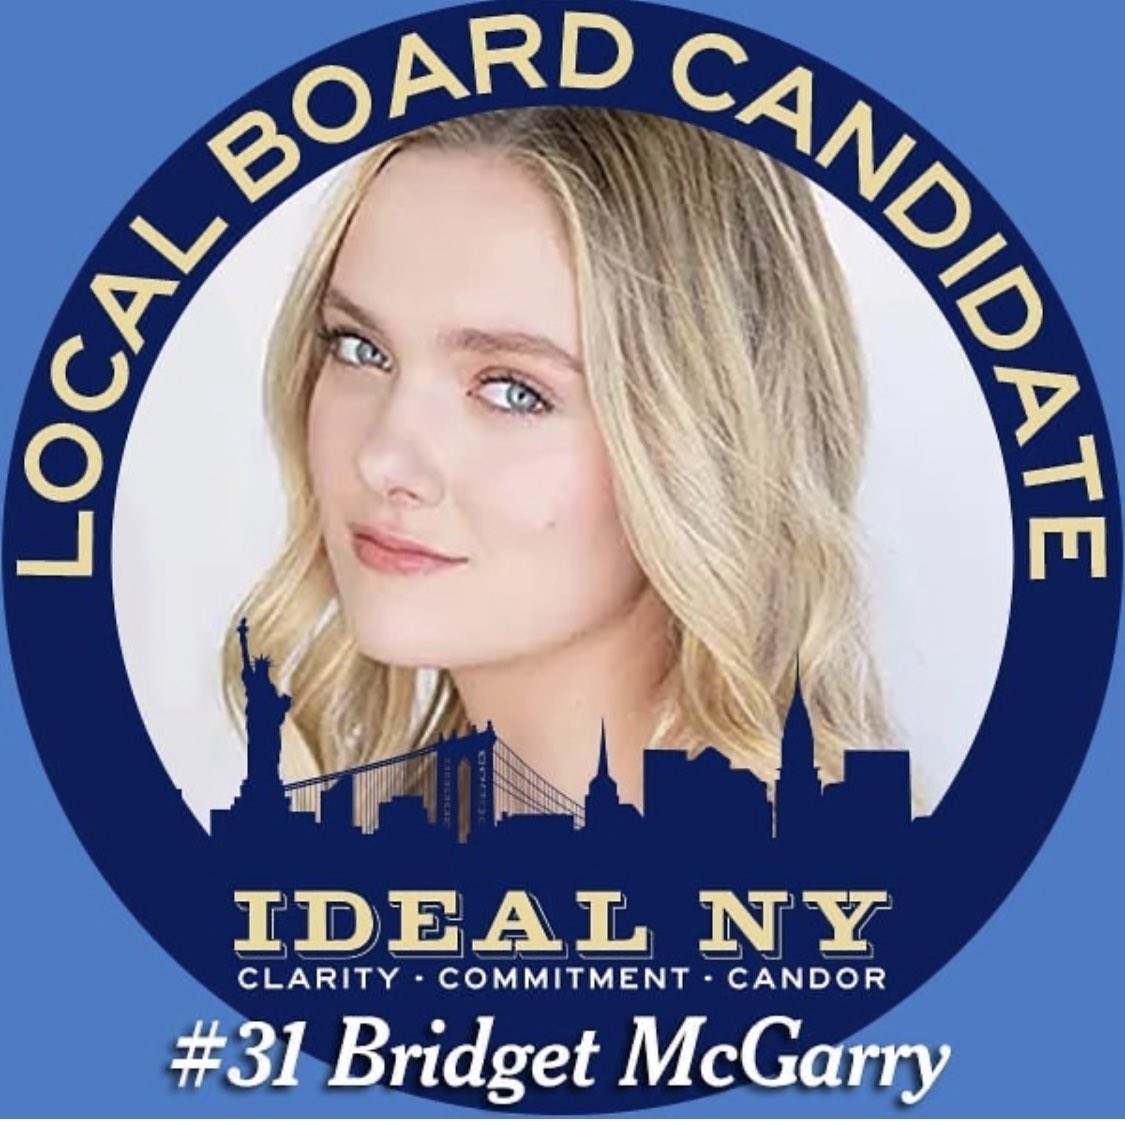 Please vote for me for NY Local Board #31 and Convention Delegate #120!! Vote for all of the @IDEAL_NY candidates as well as @MatthewModine for President and @MsJoelyFisher for Secretary/Treasurer!! We need them!! #sagaftra #SAGAFTRAelection